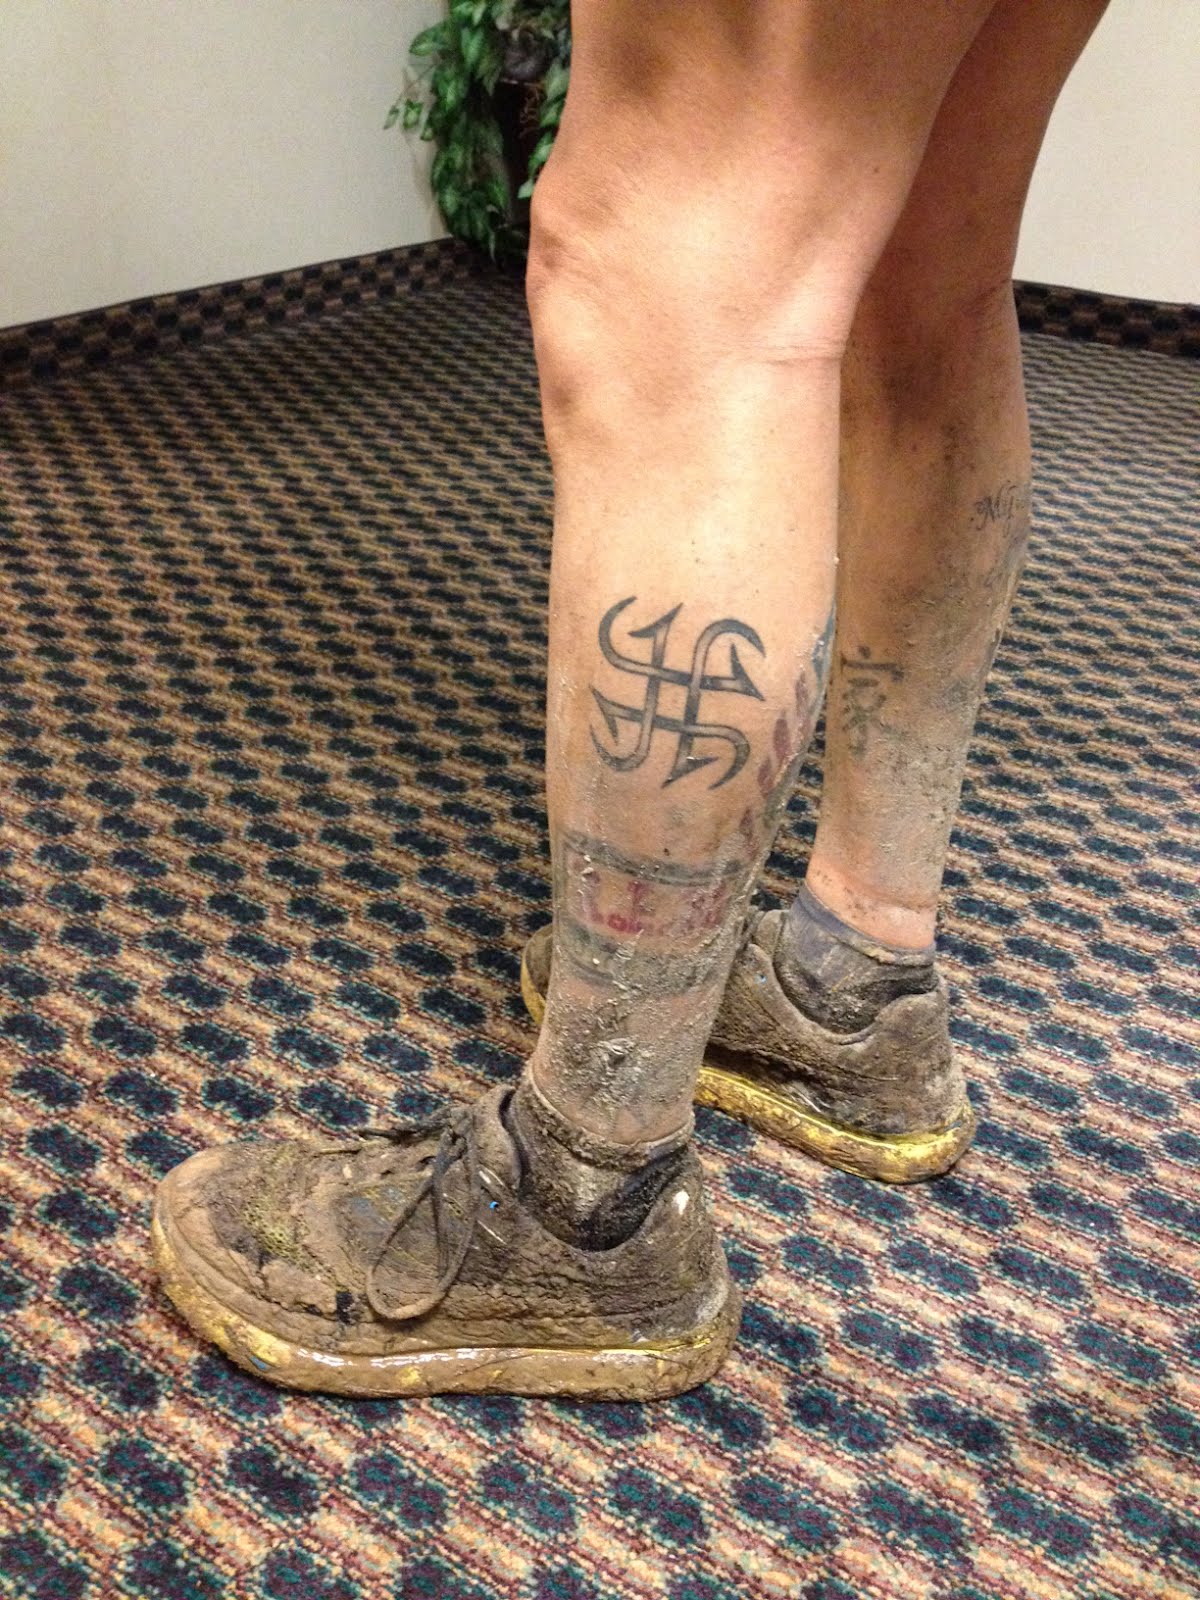 42 Good, Bad, And Questionable Tattoos For People Wh...